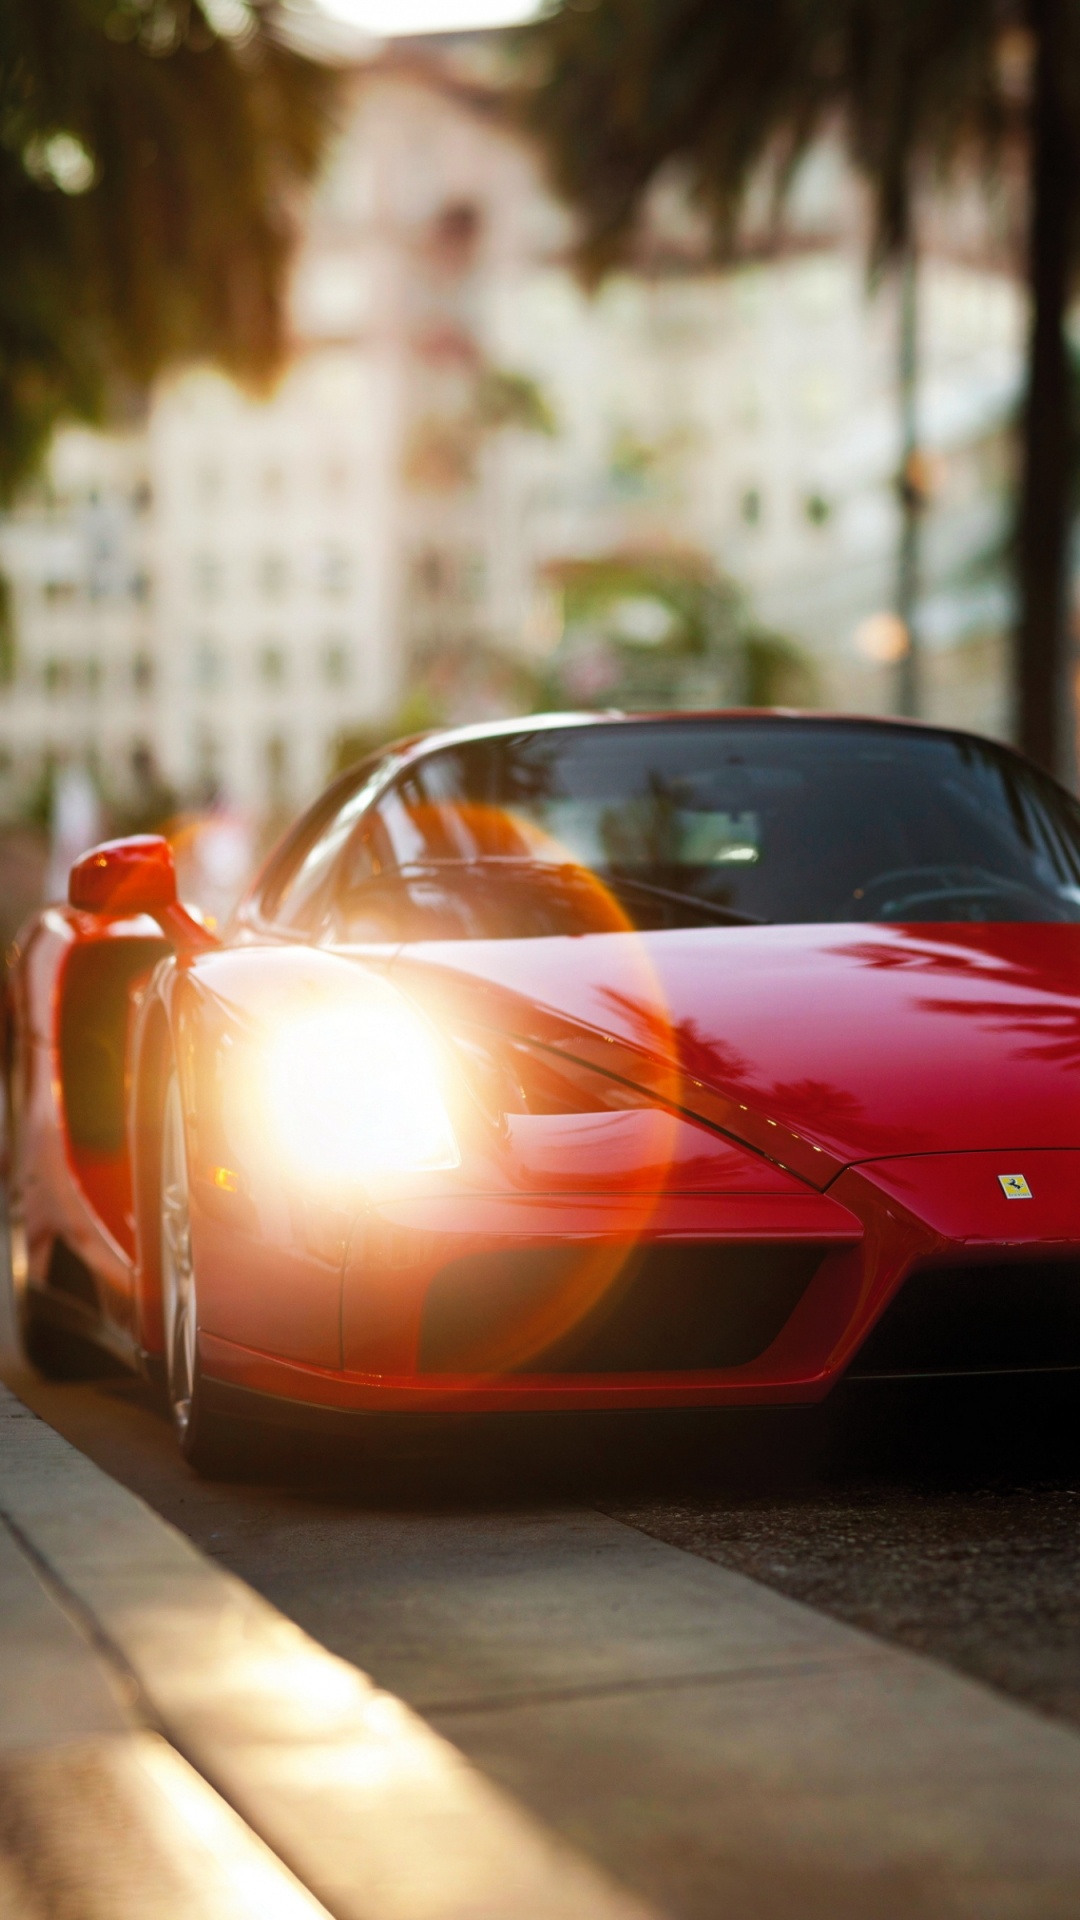 Red Ferrari Sports Car on Road During Daytime. Wallpaper in 1080x1920 Resolution